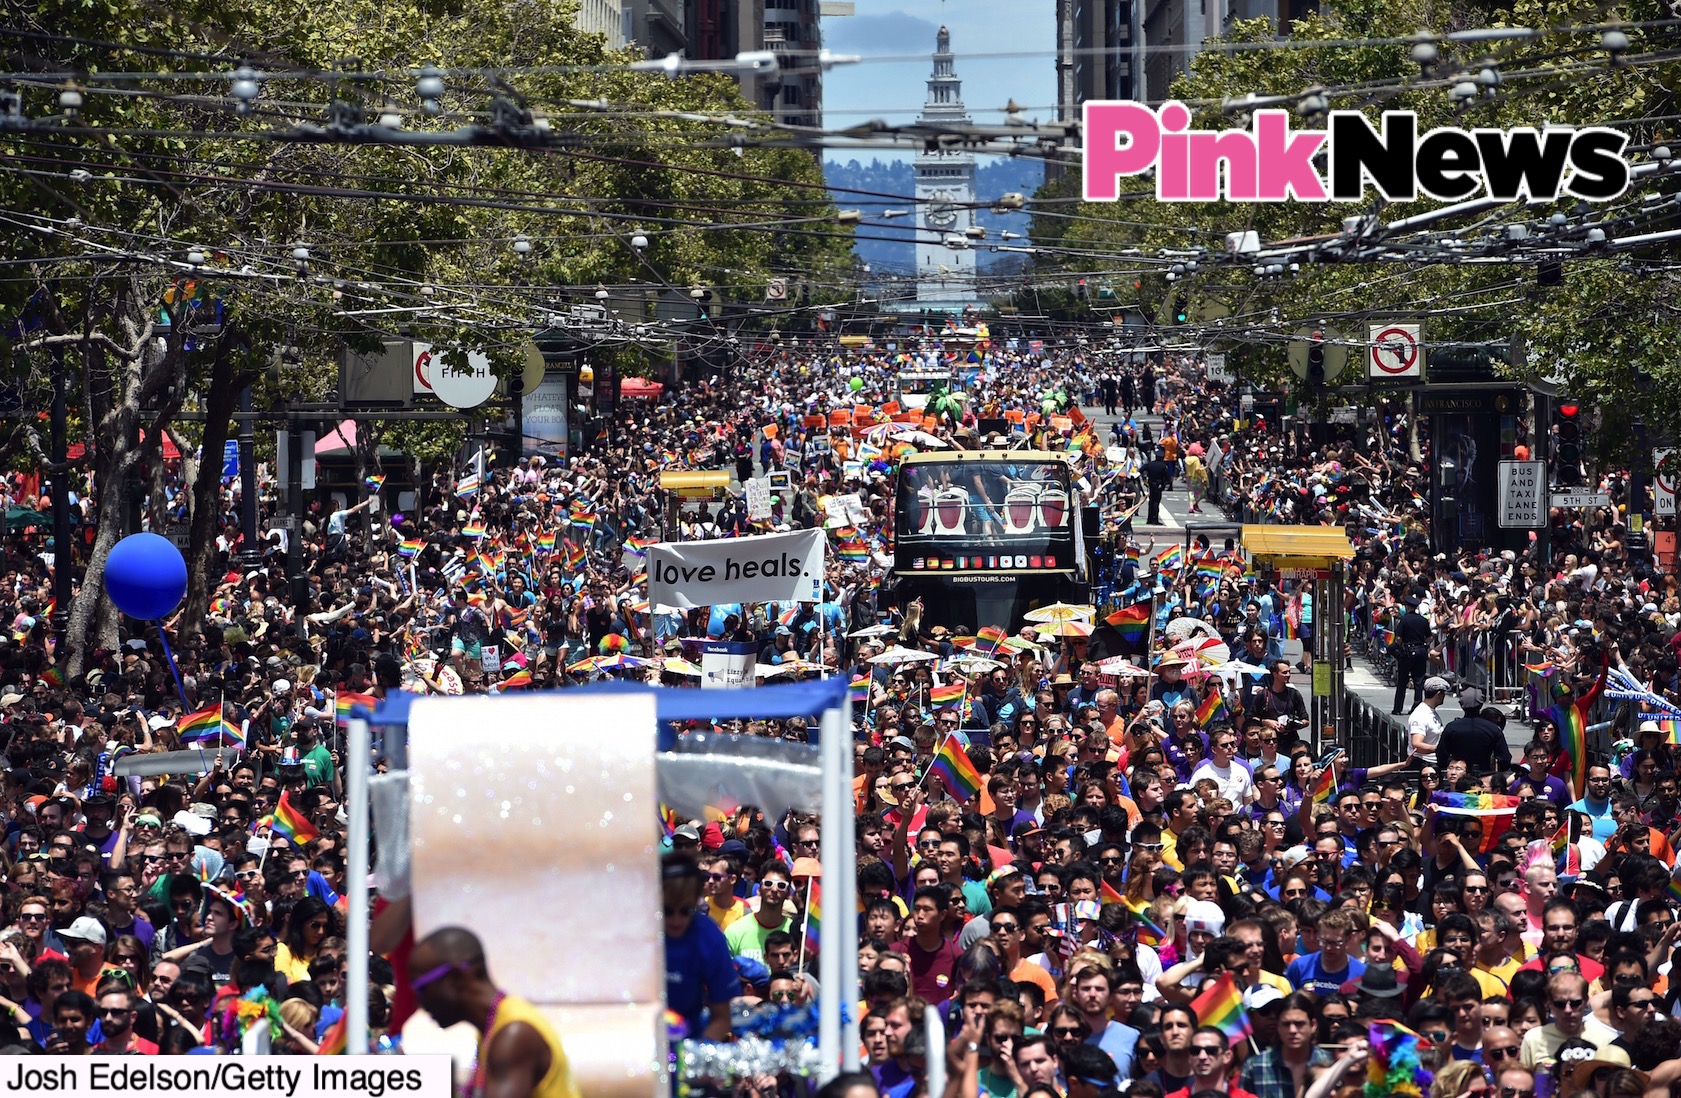 Thousands march along Market Street during the annual Gay Pride parade in San Francisco, California on June 28, 2015, two days after  the US Supreme Court's landmark ruling legalizing same-sex marriage nationwide.    AFP PHOTO / JOSH EDELSON        (Photo credit should read Josh Edelson/AFP/Getty Images)